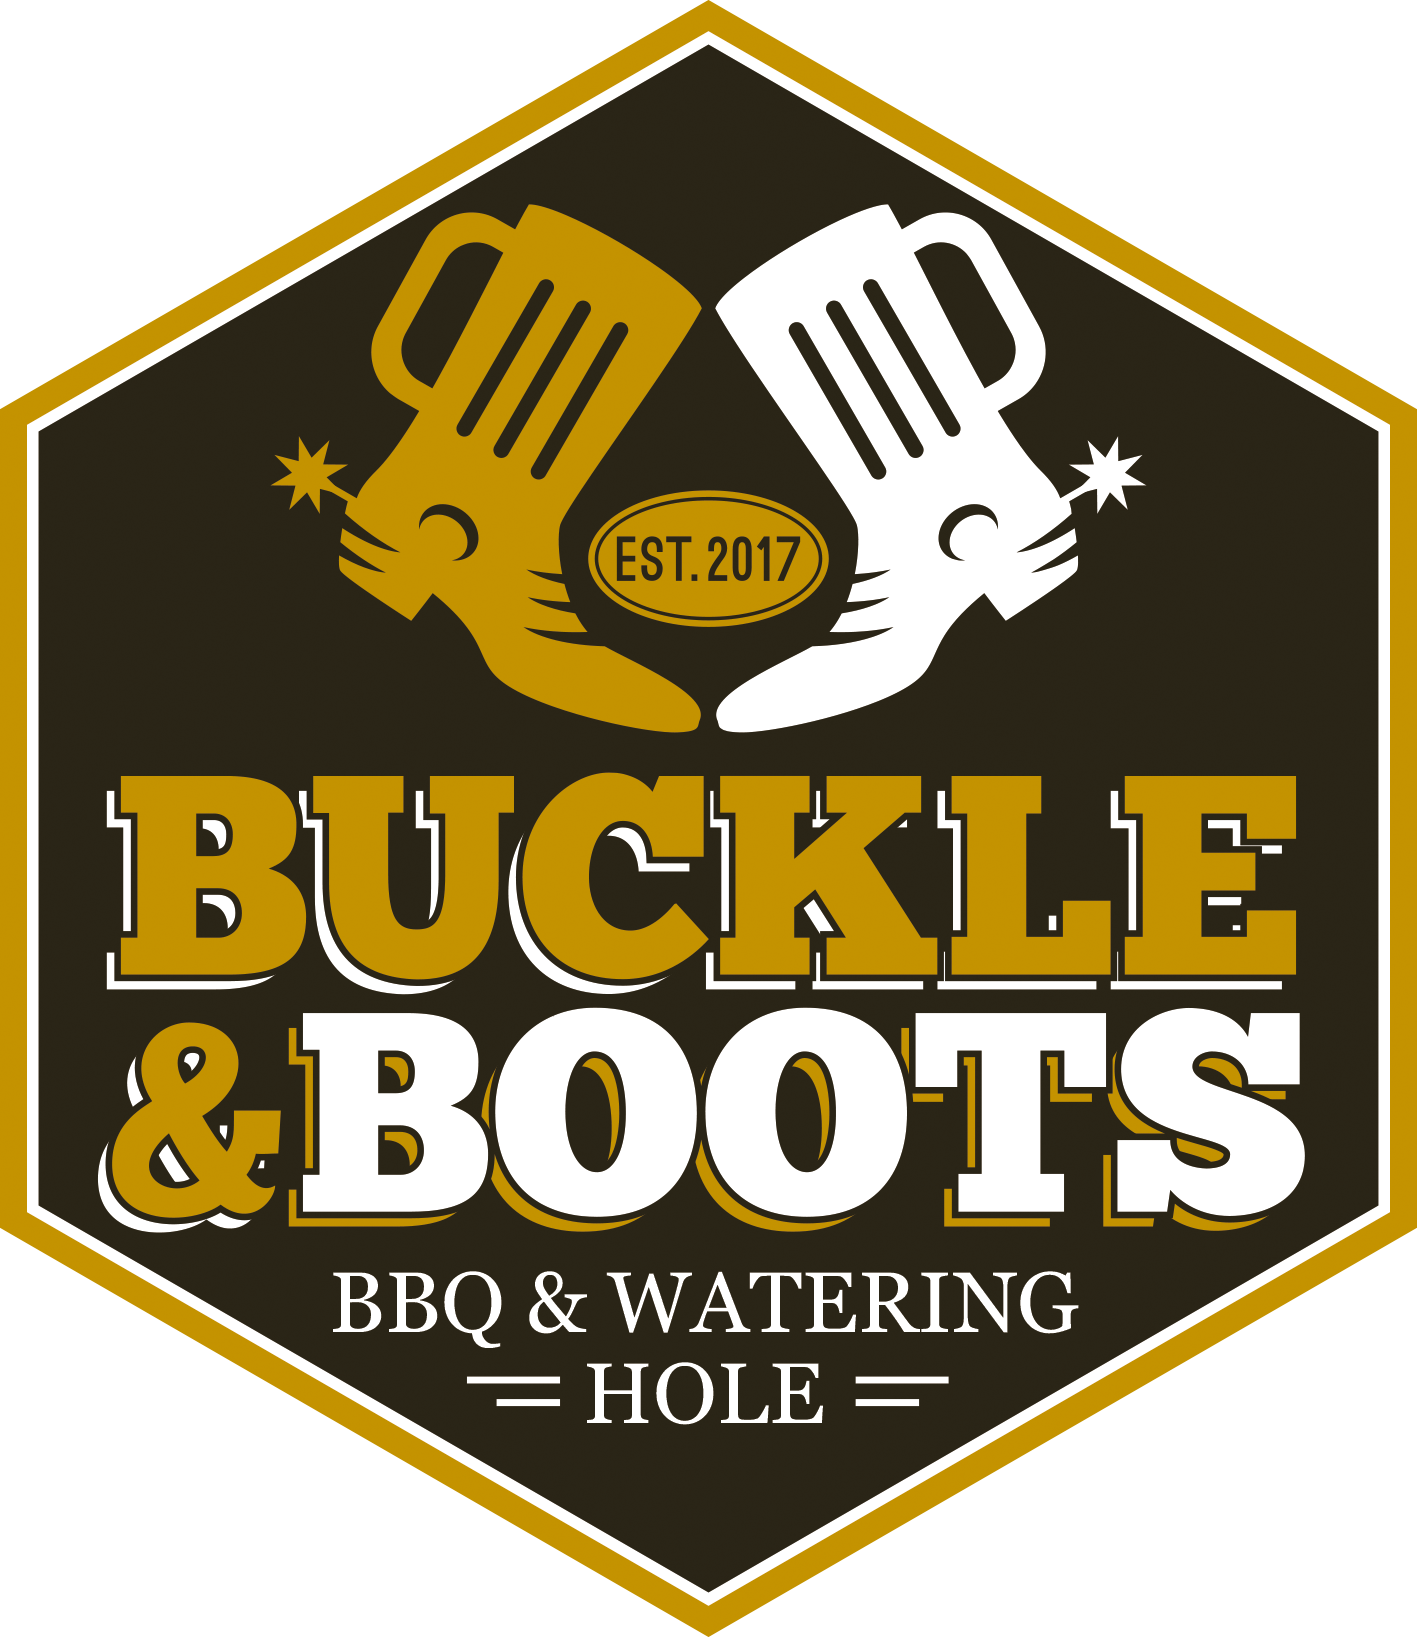 Buckle & Boots BBQ & Wateringhole